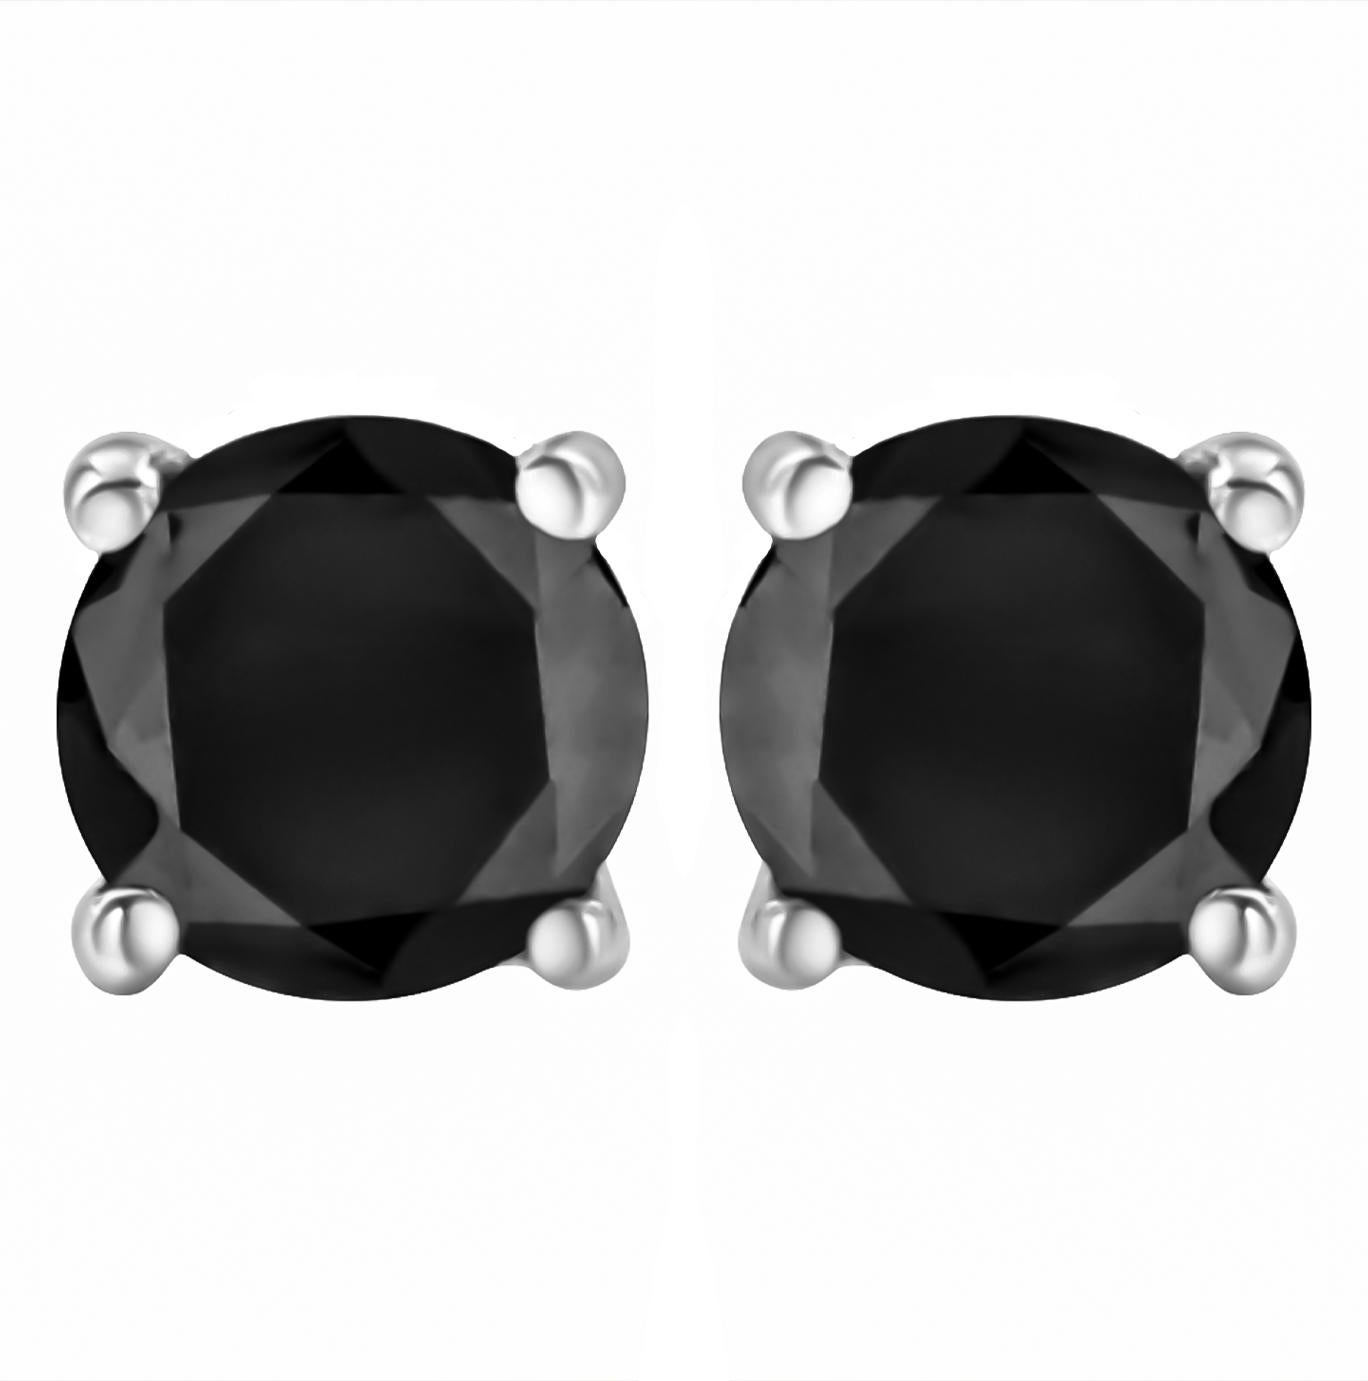 Elegant and timeless, these gorgeous 14K white gold solitaire stud earrings feature bold and beautiful heat treated, color enhanced black diamonds in a bezel setting. The earrings feature screwback closures. The notched posts and friction backs keep